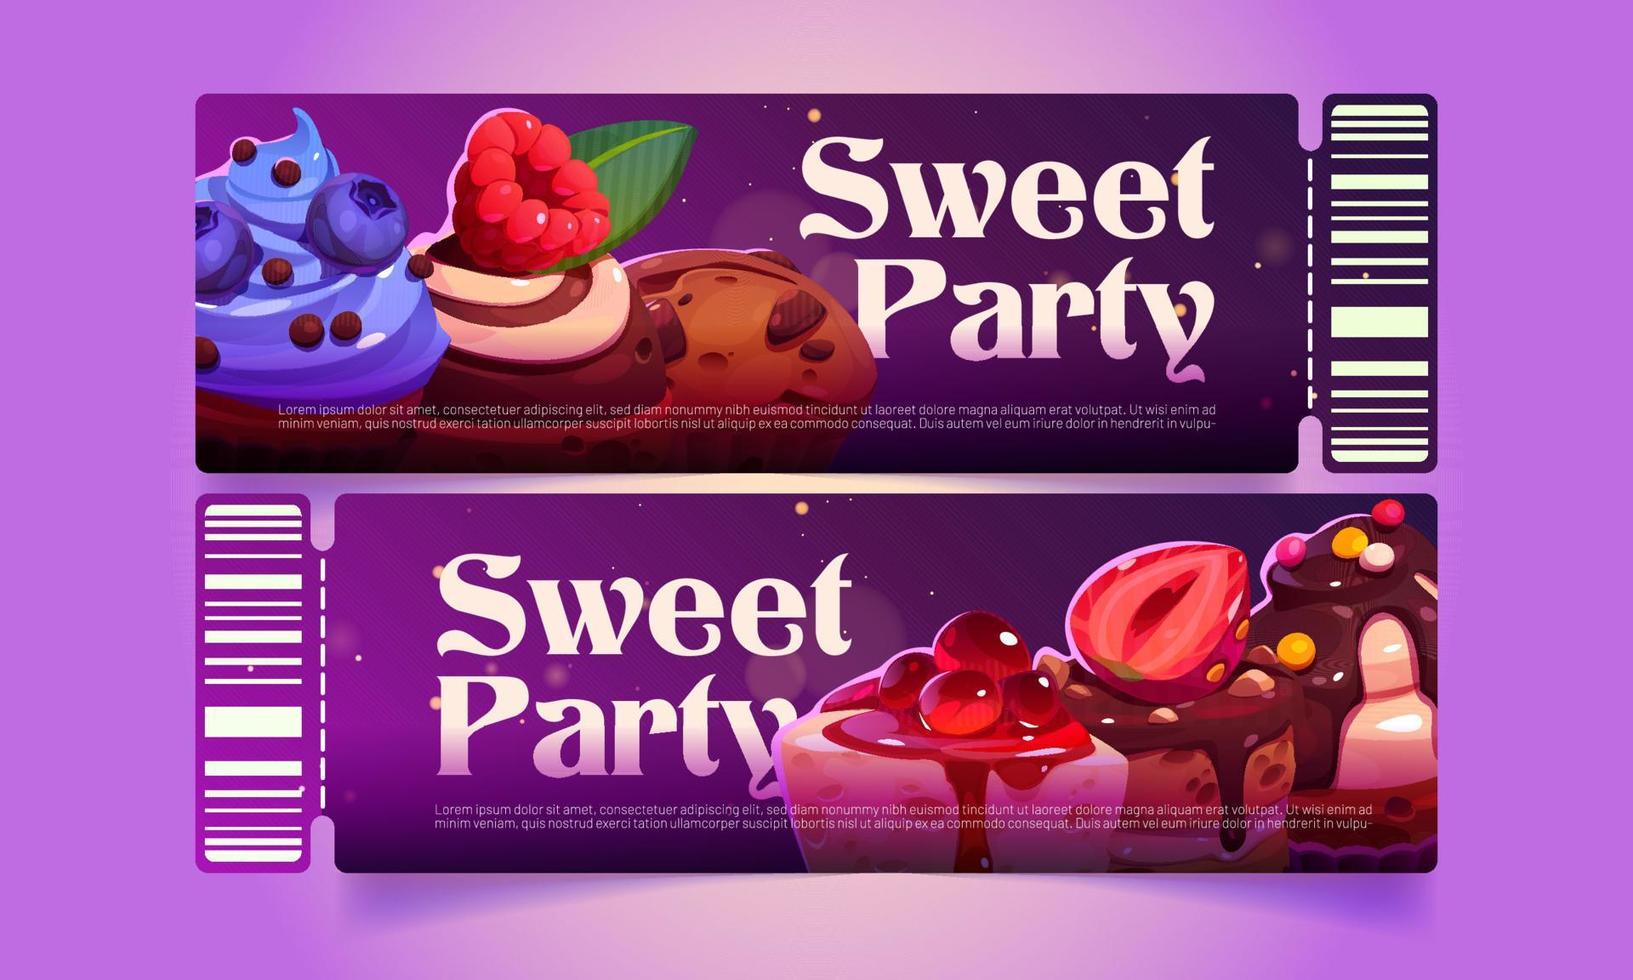 Sweet party coupons with cakes and desserts vector